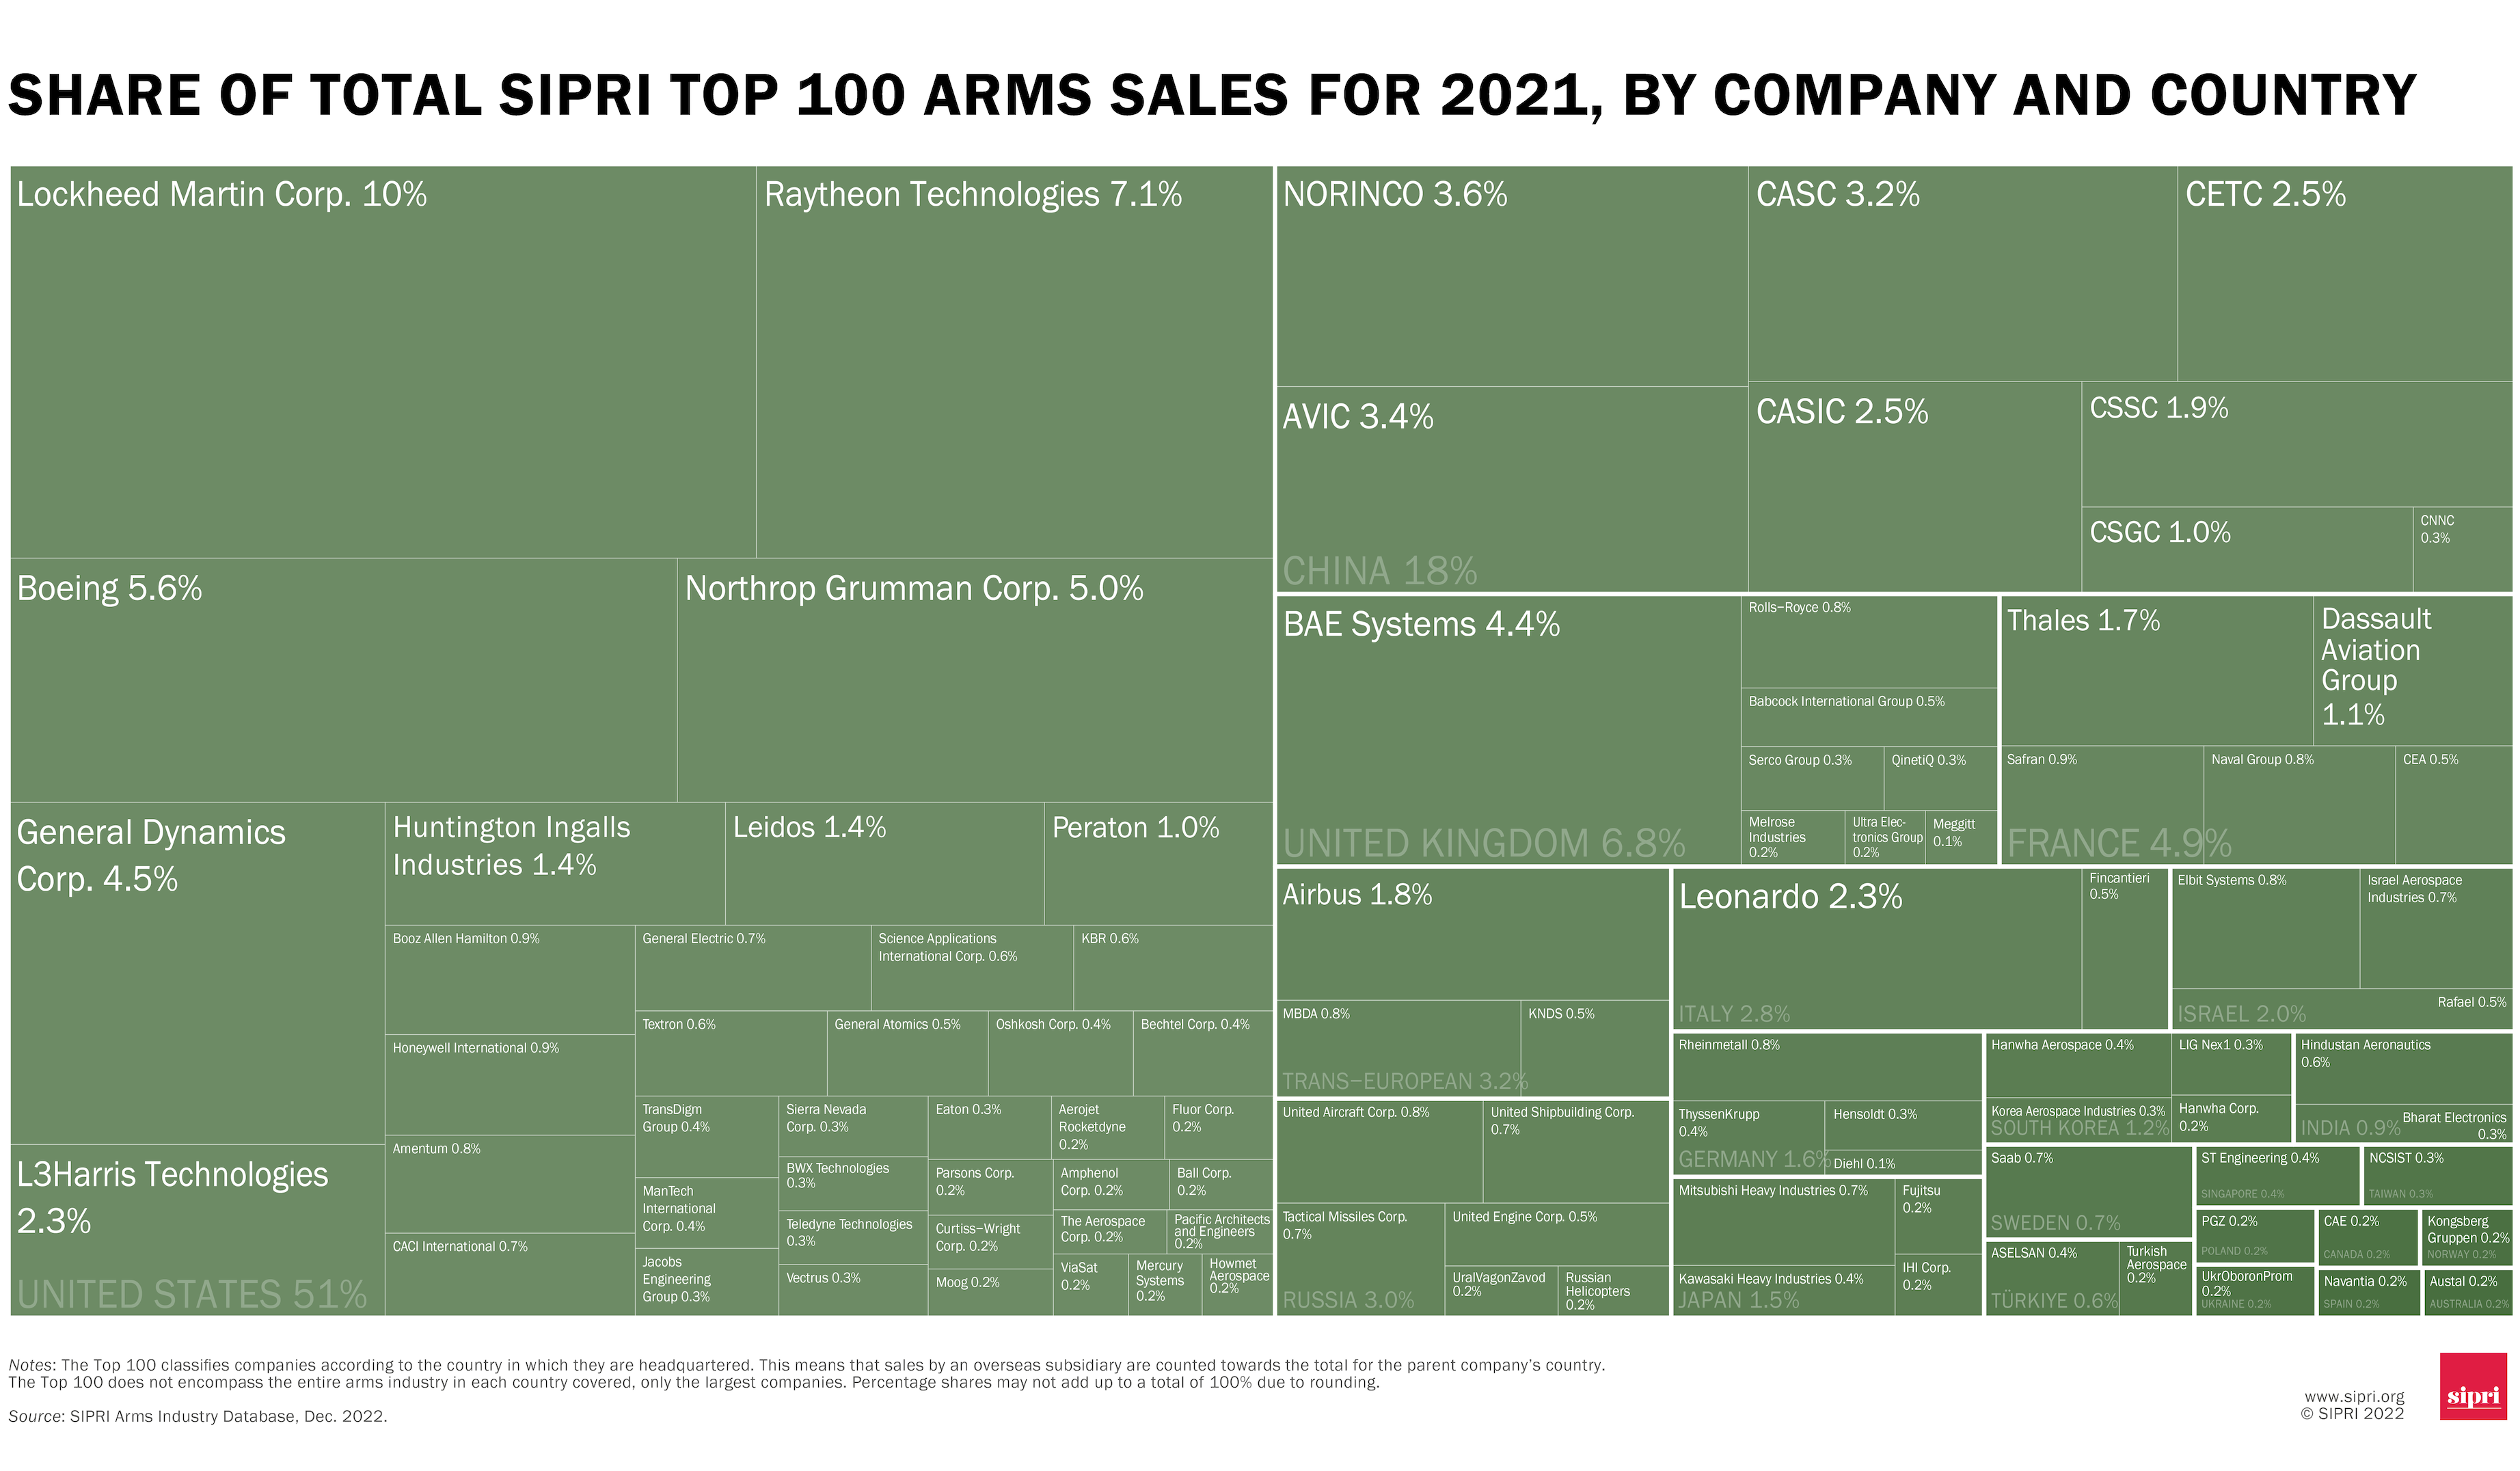 Link to Share of total SIPRI Top 100 arms sales for 2021, by company and country